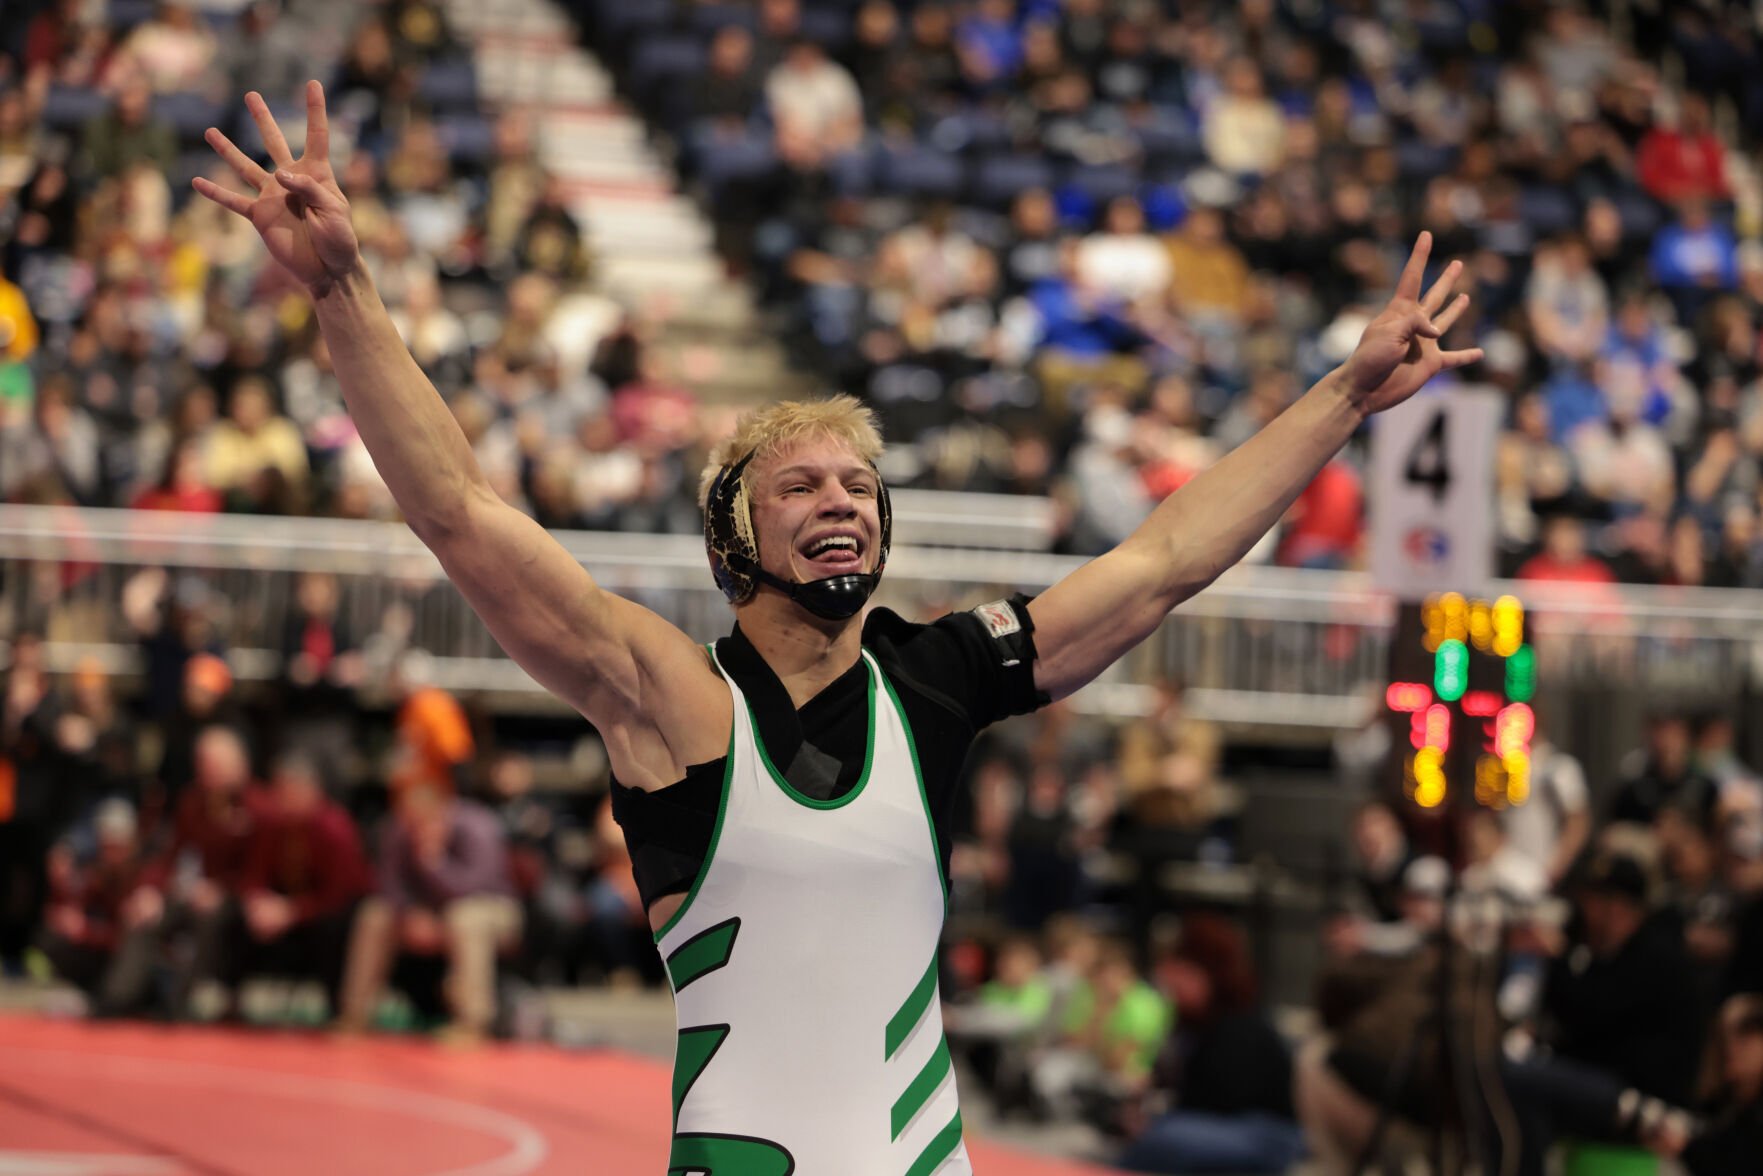 Wyoming Sports News: Avila, Fletcher, and Knezovich Lead Teams to State Titles in Wrestling, Wheeler Dominates Nordic Championships, Undefeated Basketball Teams Remain